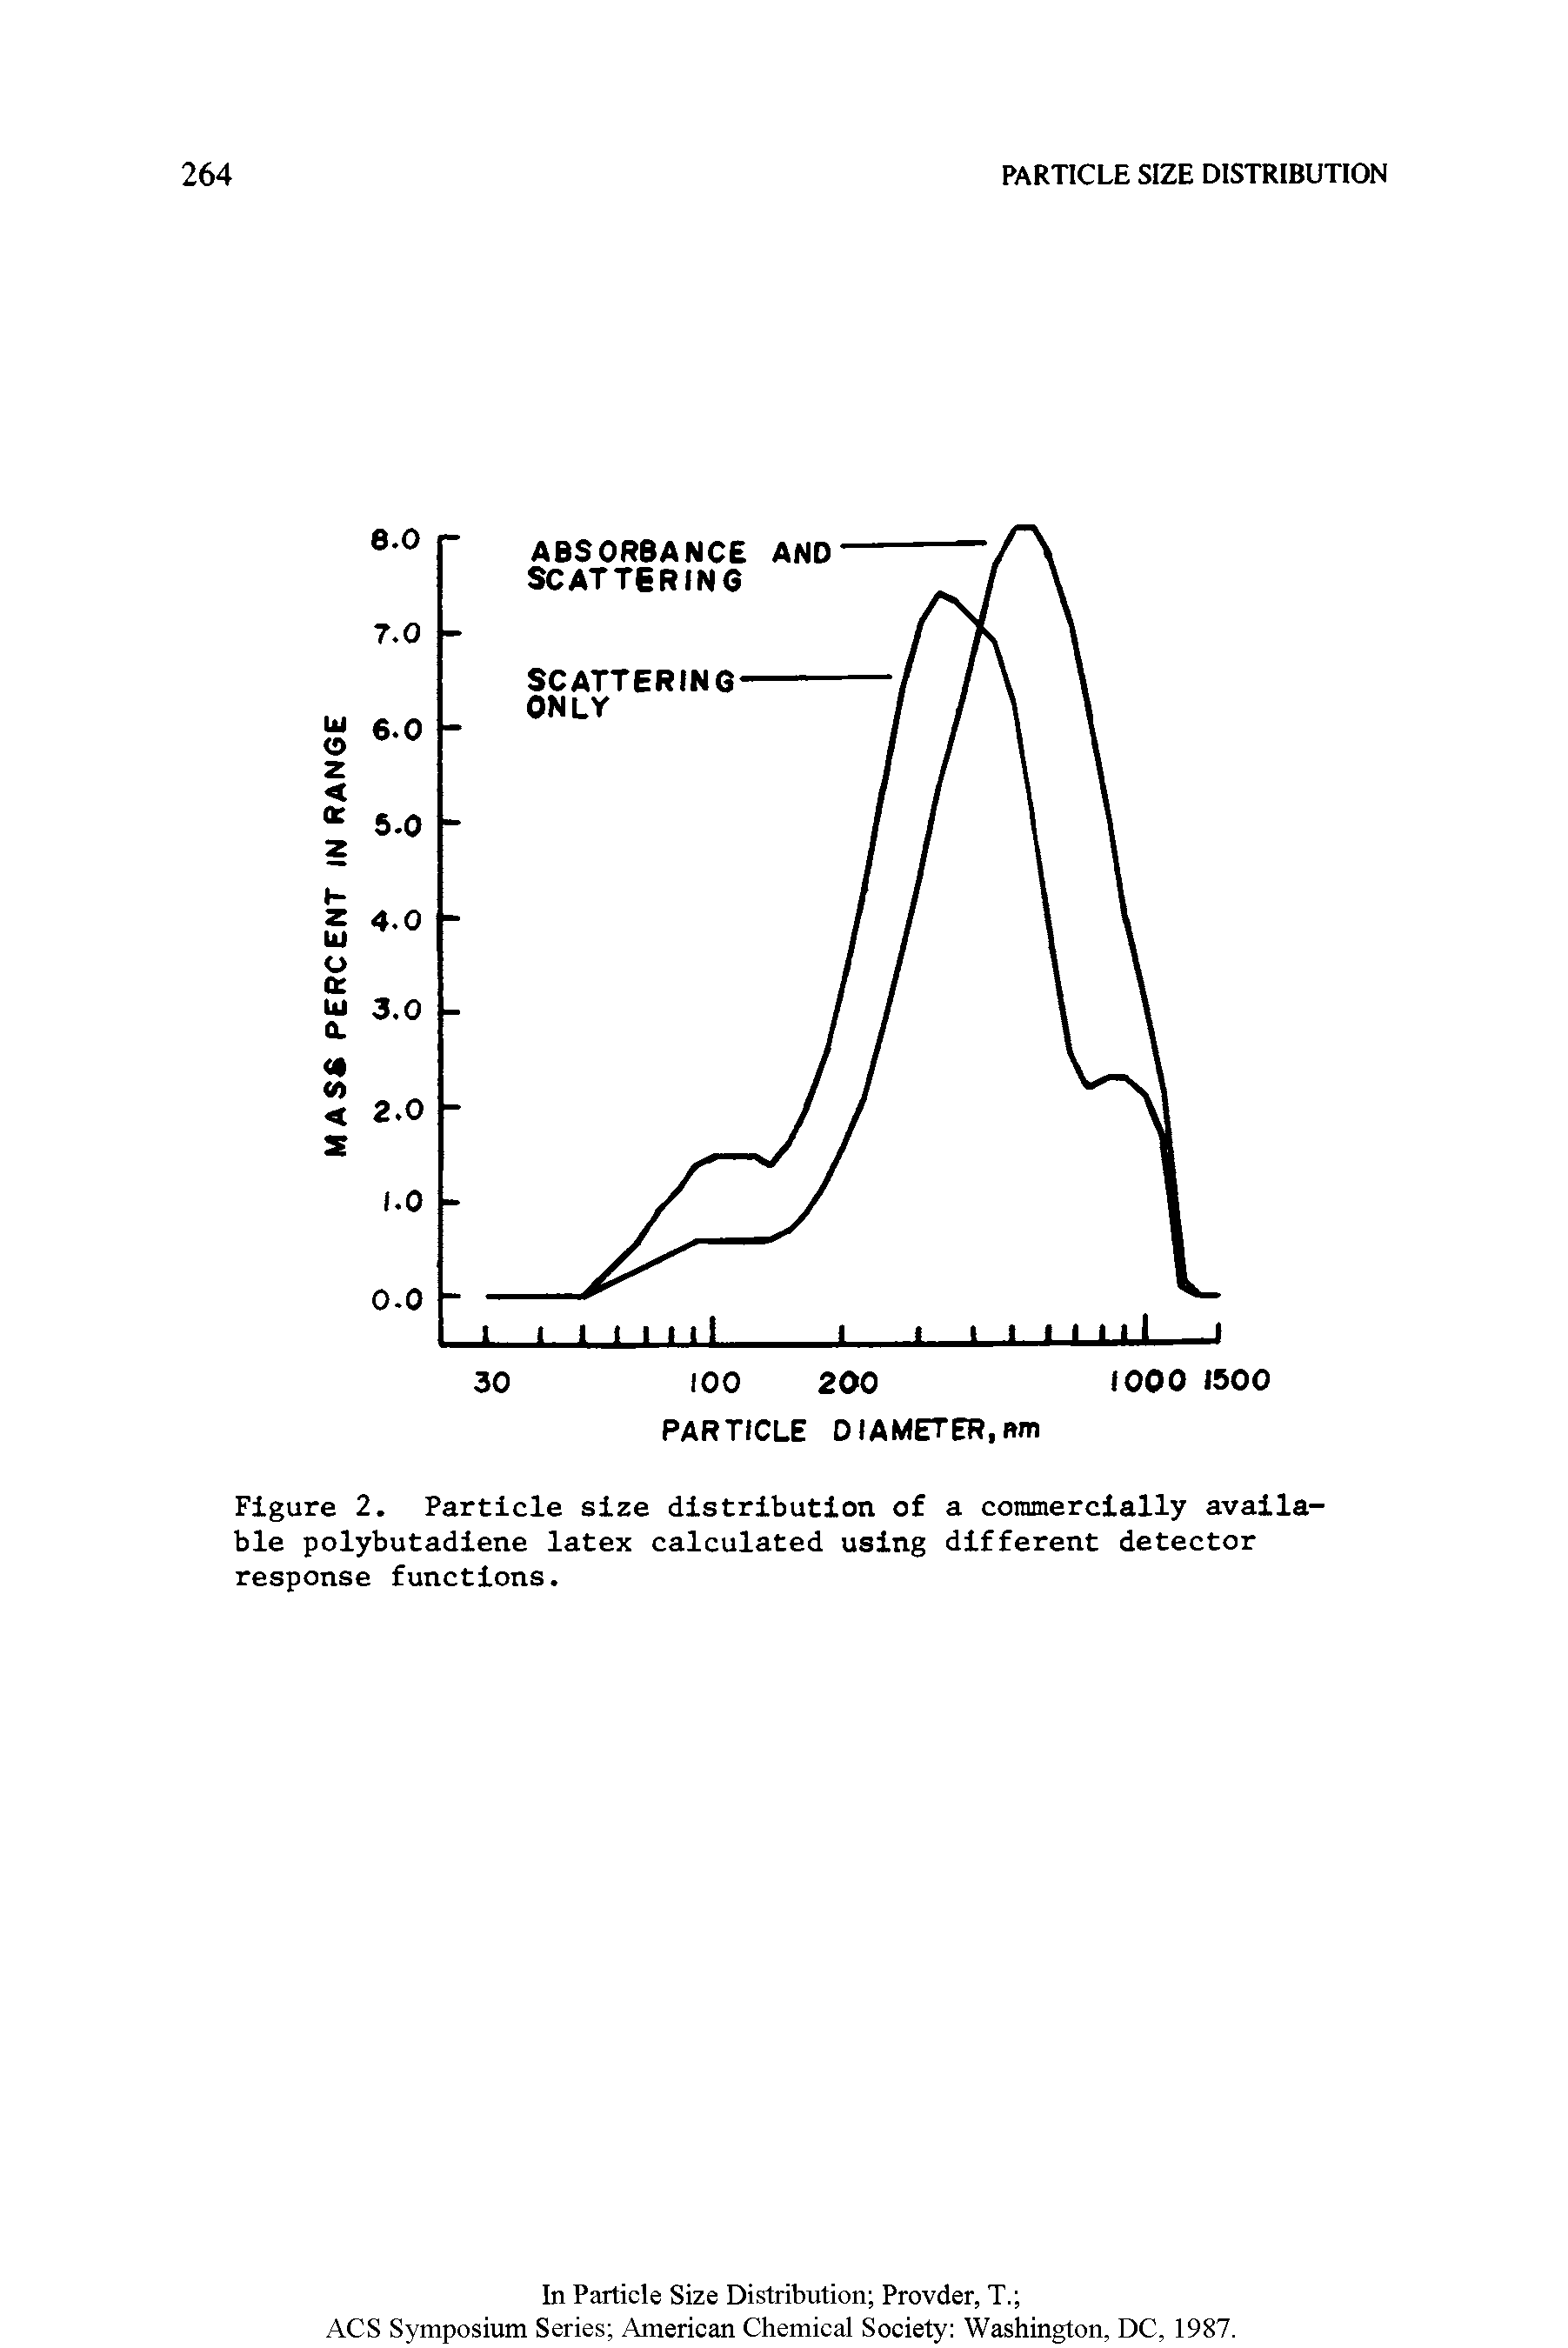 Figure 2. Particle size distribution of a commercially available polybutadiene latex calculated using different detector response functions.